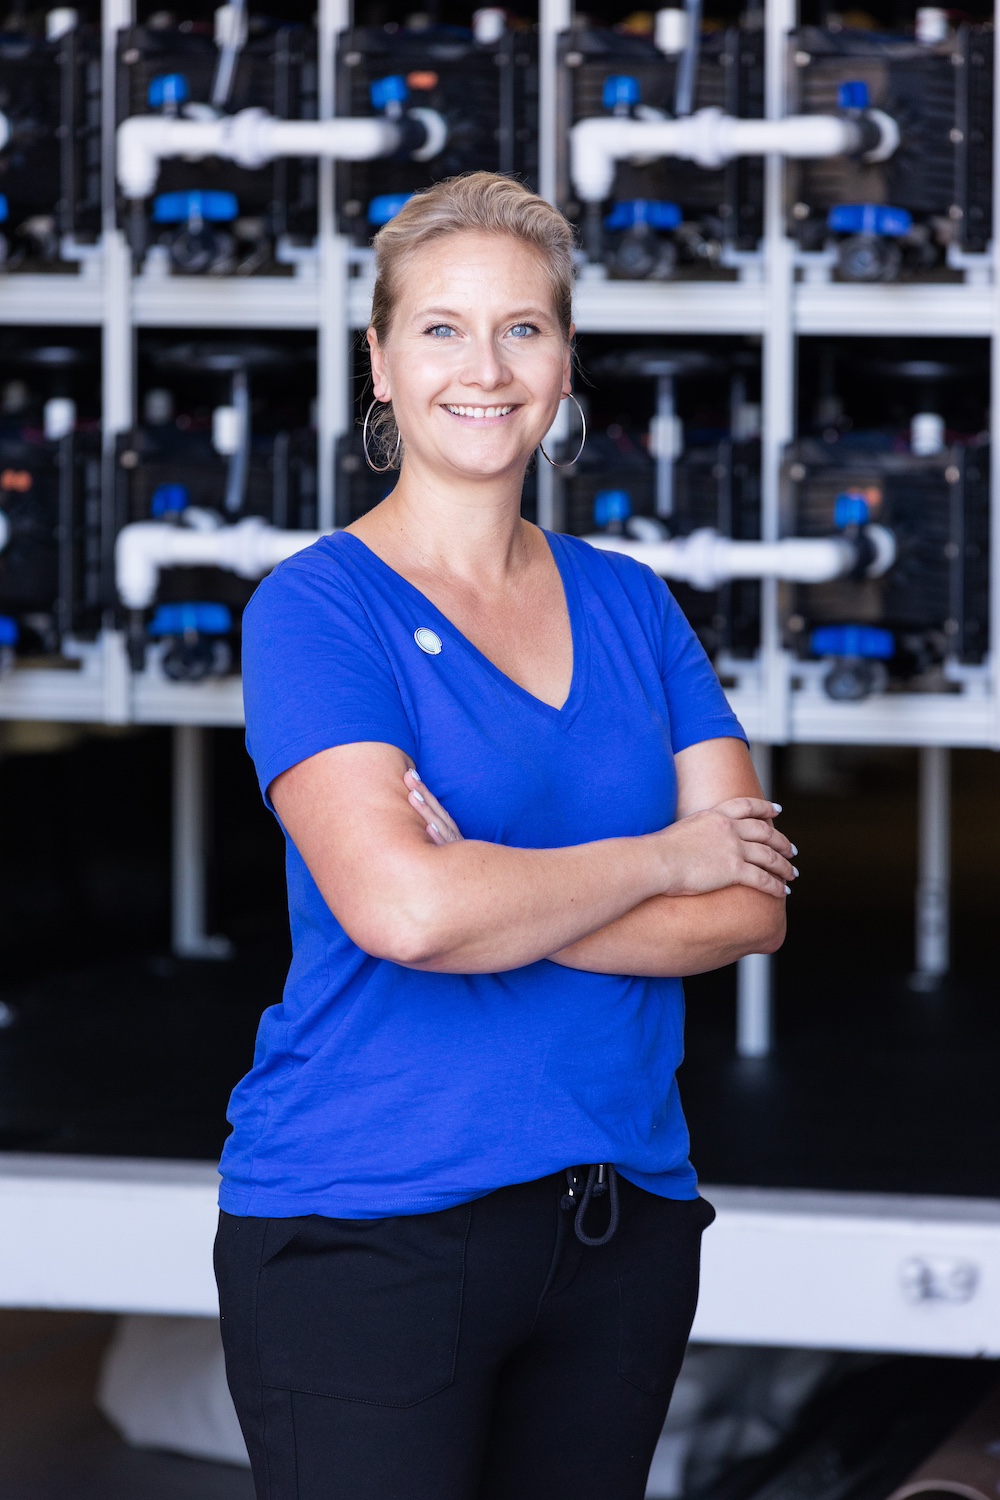 Orianna Bretschger, co-founder and CEO of Aquacycl. 